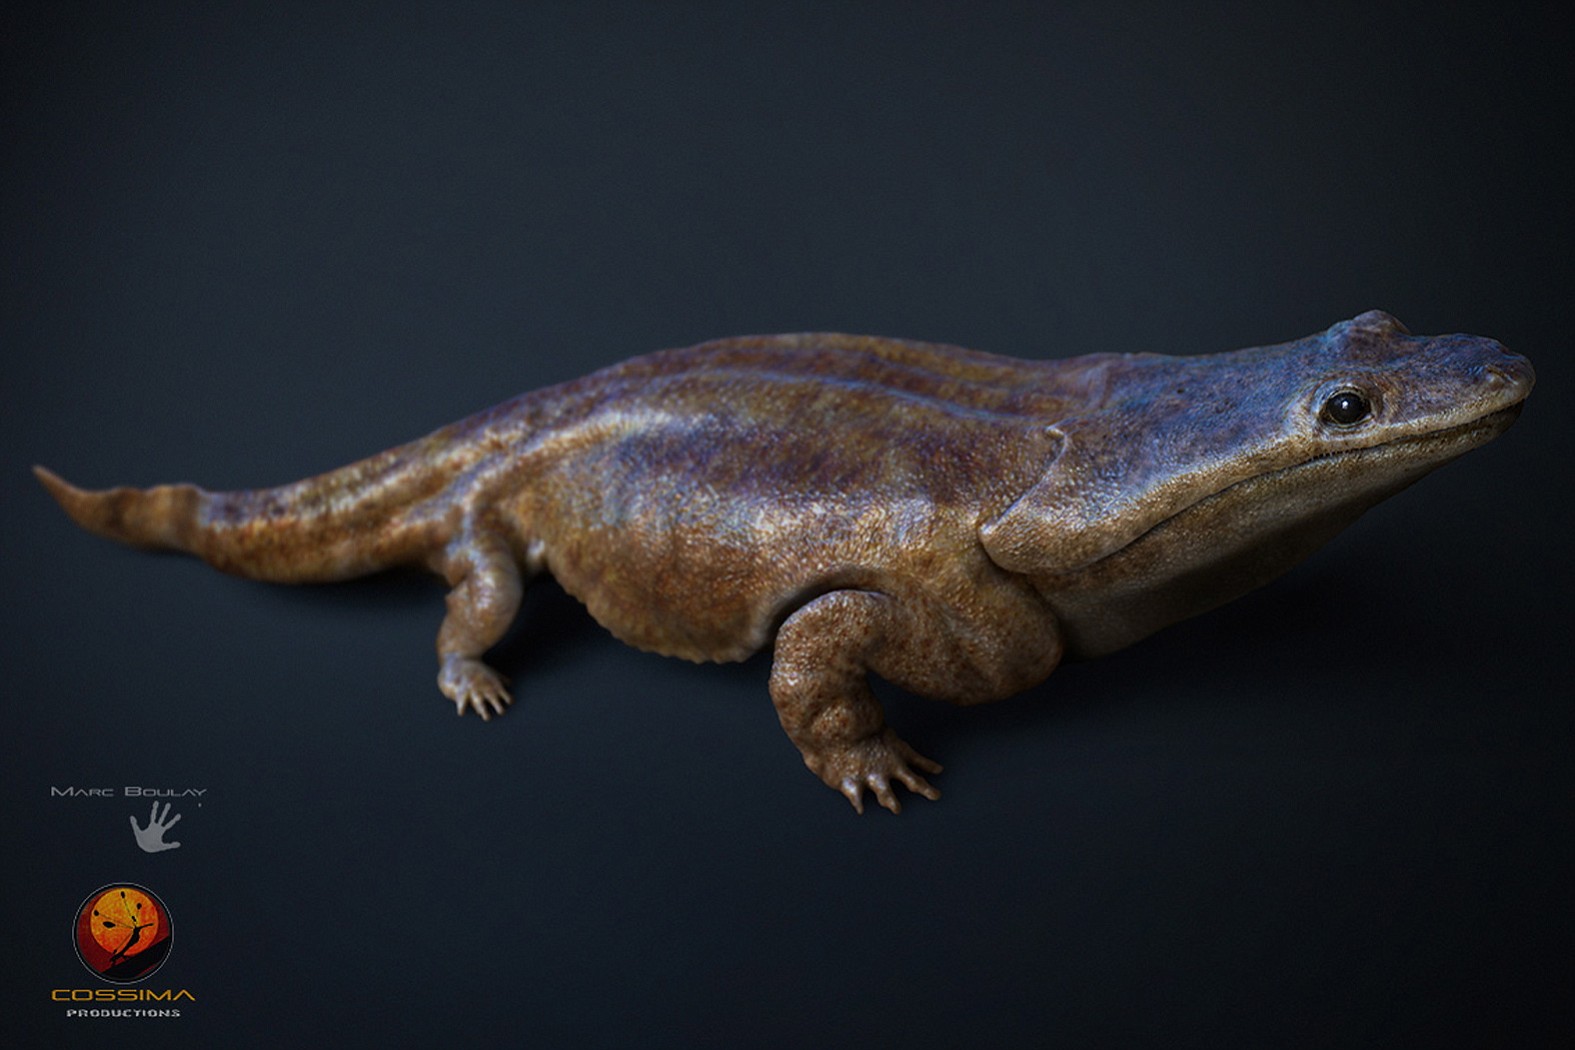 marc boulay/University of Edinburgh/Cossima Productions
This artist's rendition shows a Metoposaurus algarvensis, a previously unknown species of crocodile-like &quot;super salamander&quot; that roamed the Earth -- specifically, Portugal -- more than 200 million years ago. It grew up to 6 feet long.